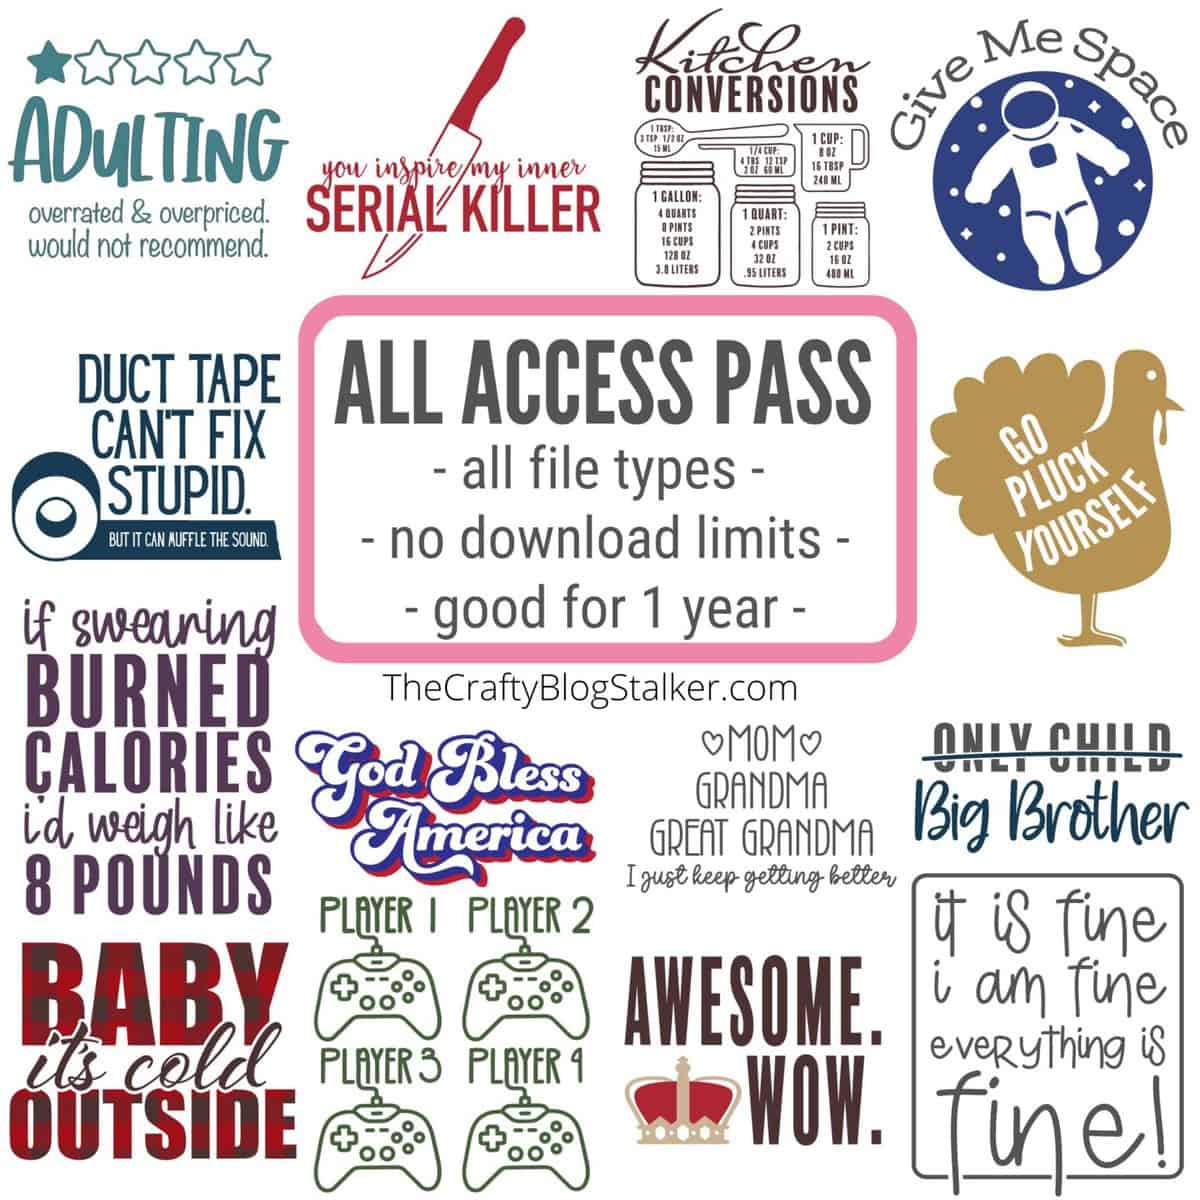 All Access Pass The Crafty Blog Stalker